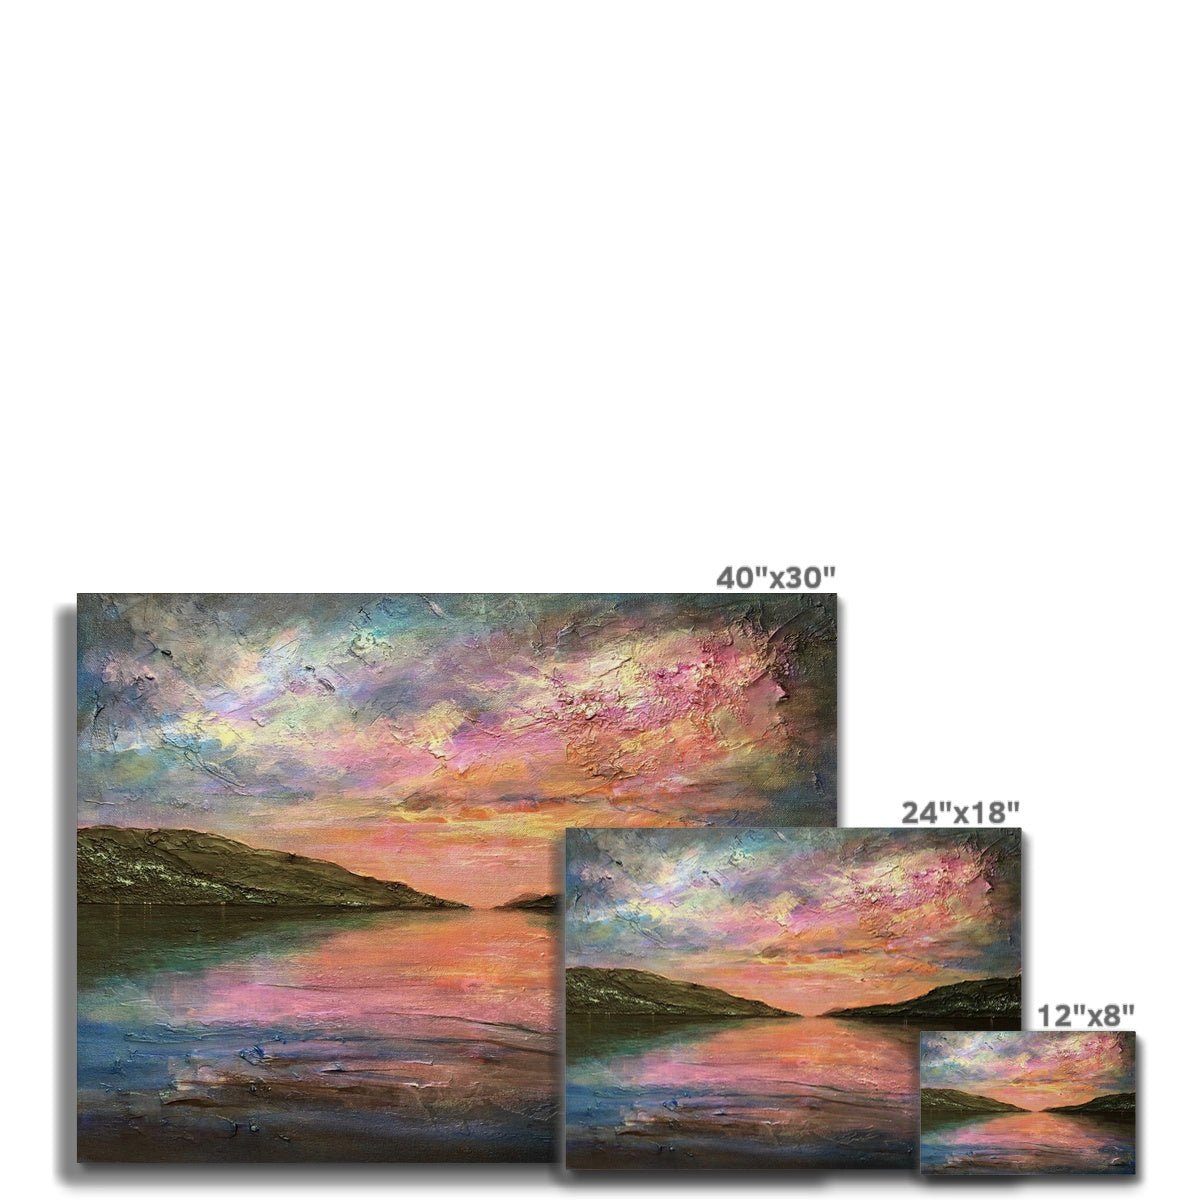 Loch Ness Dawn Painting | Canvas From Scotland-Contemporary Stretched Canvas Prints-Scottish Lochs & Mountains Art Gallery-Paintings, Prints, Homeware, Art Gifts From Scotland By Scottish Artist Kevin Hunter